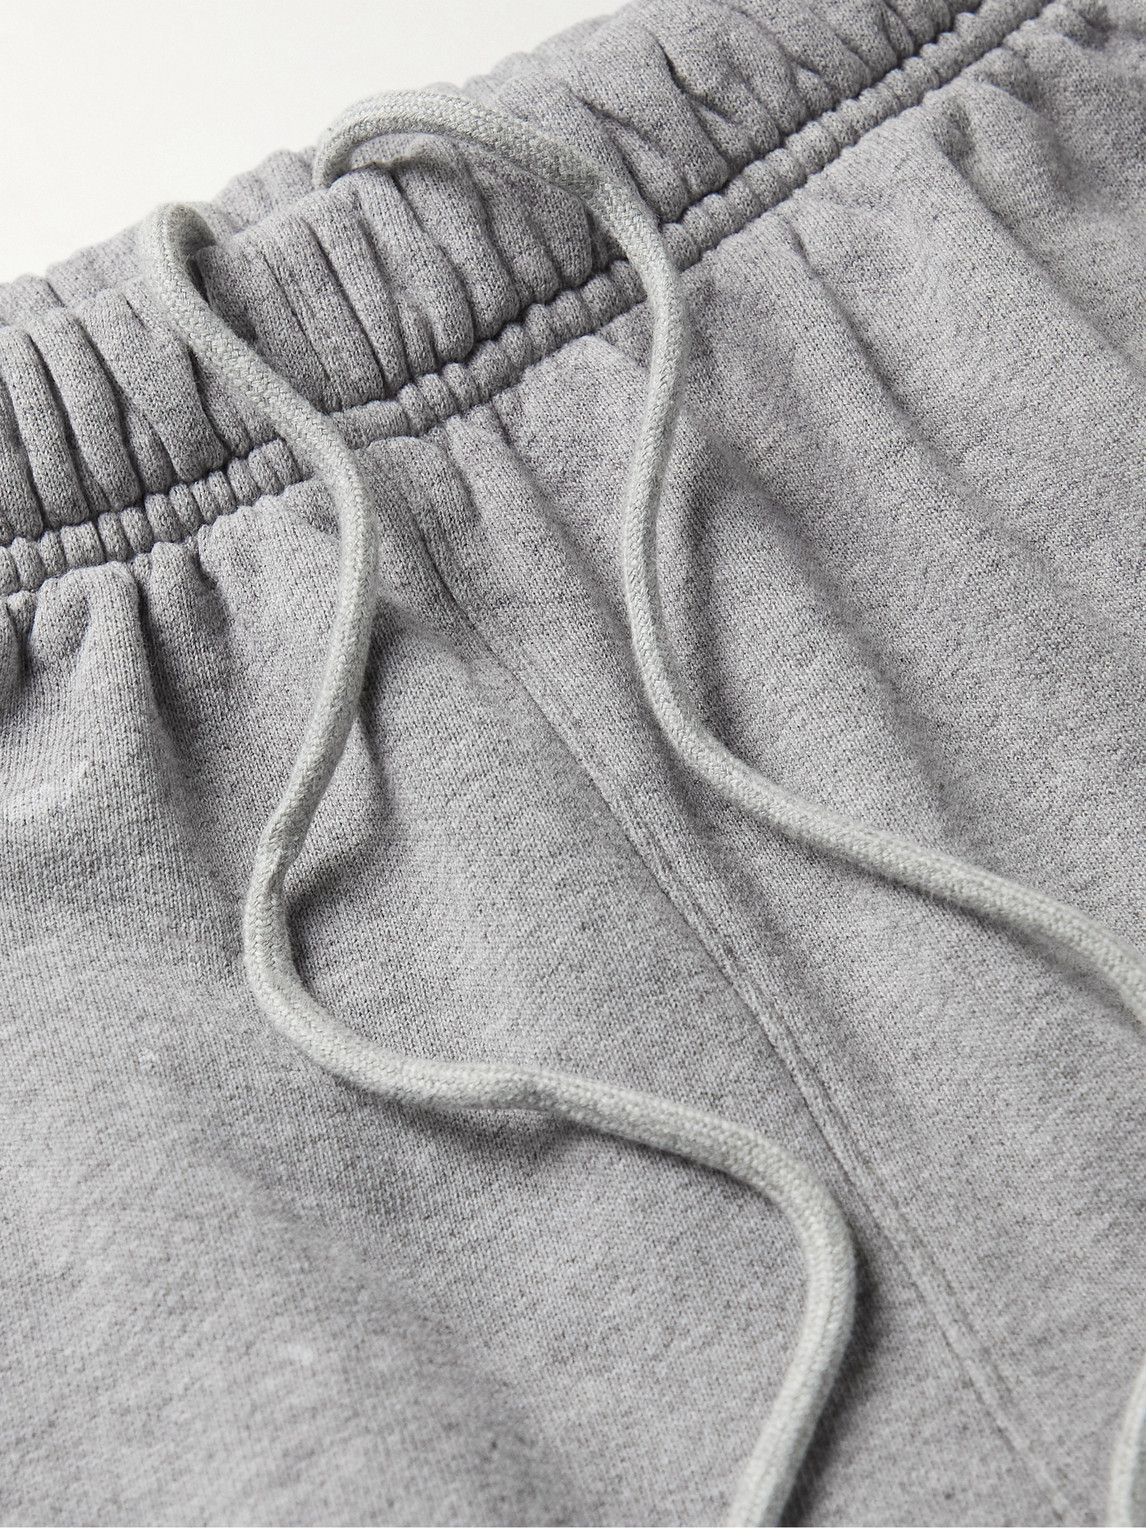 GALLERY DEPT. Cotton joggers in Gray for Men